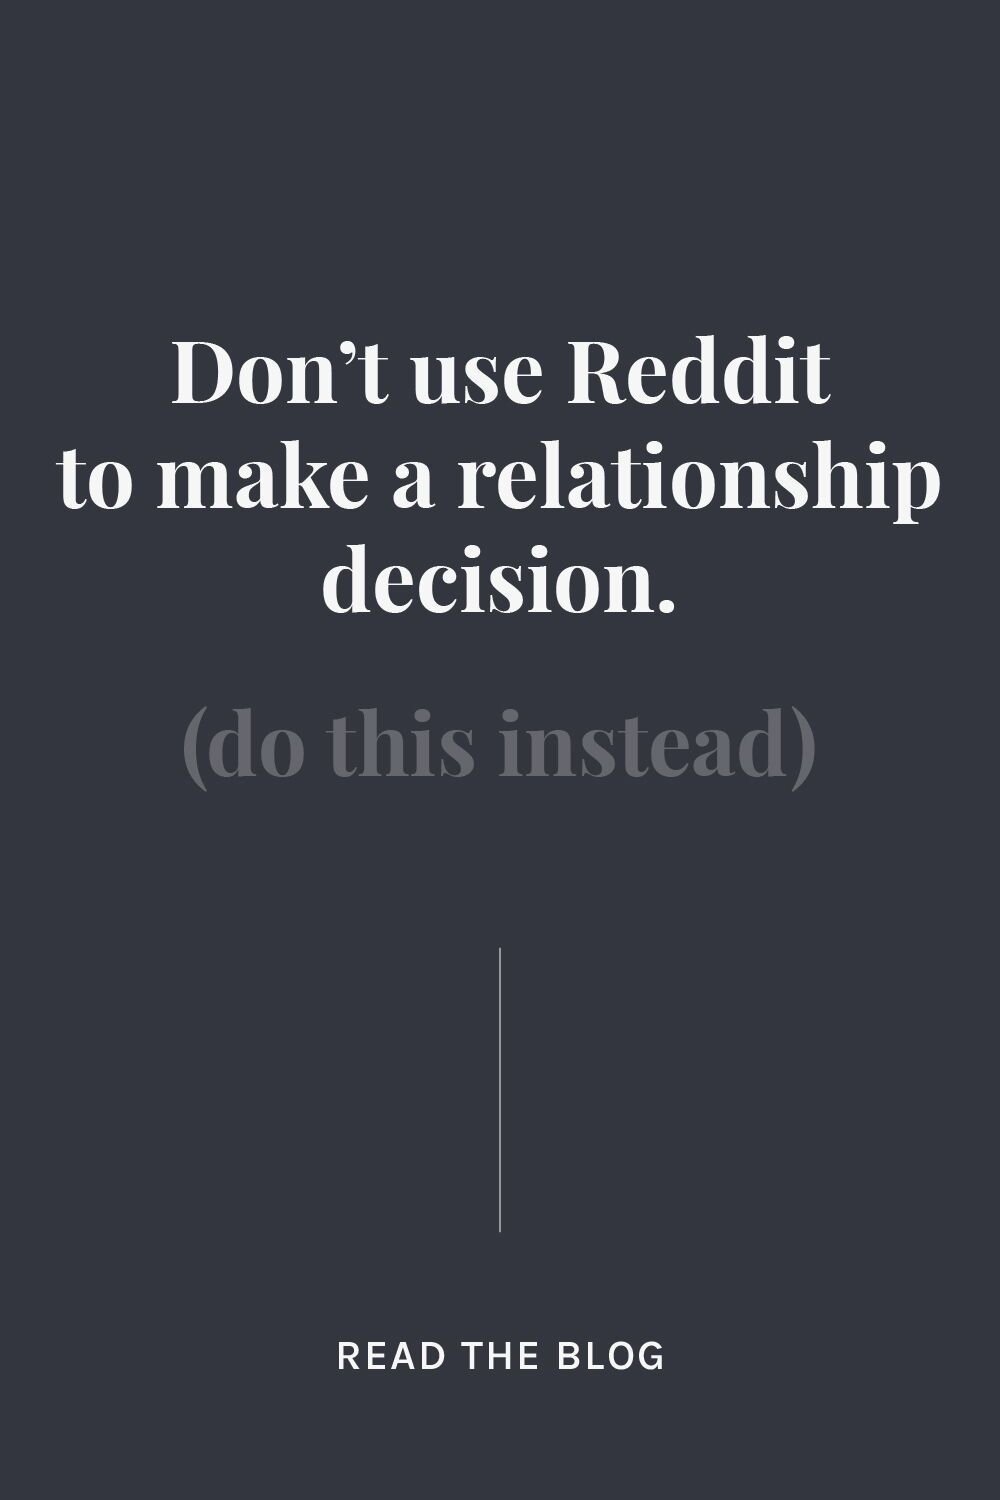 What's the Most Real Relationship Advice You Can Give? (Dating Reddit  Stories r/AskReddit) - YouTube